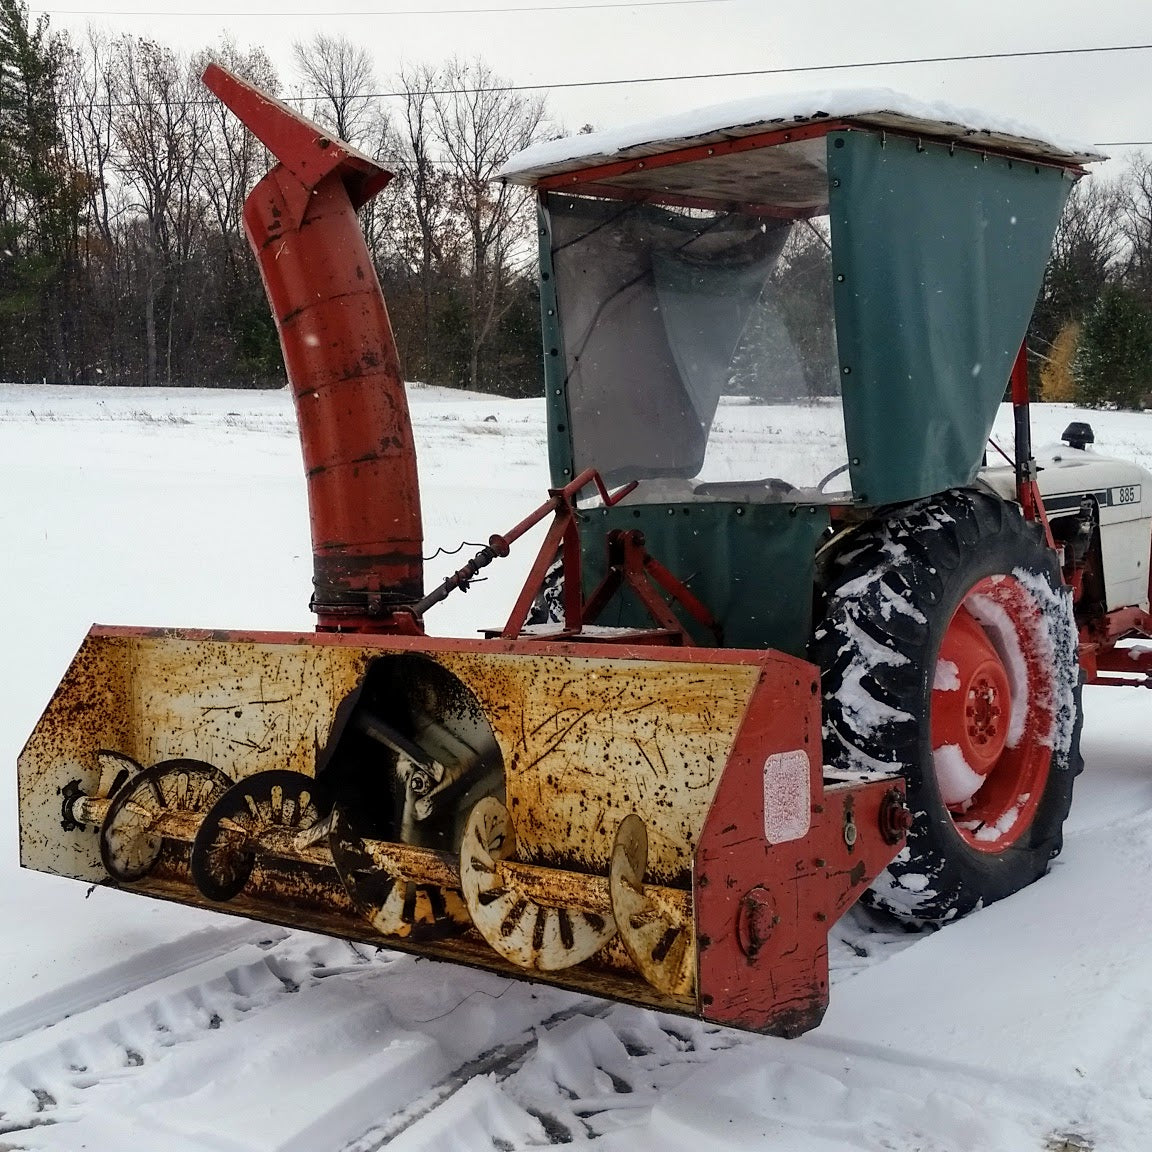 Clearing Snow Finger Lakes Style with a Tractor